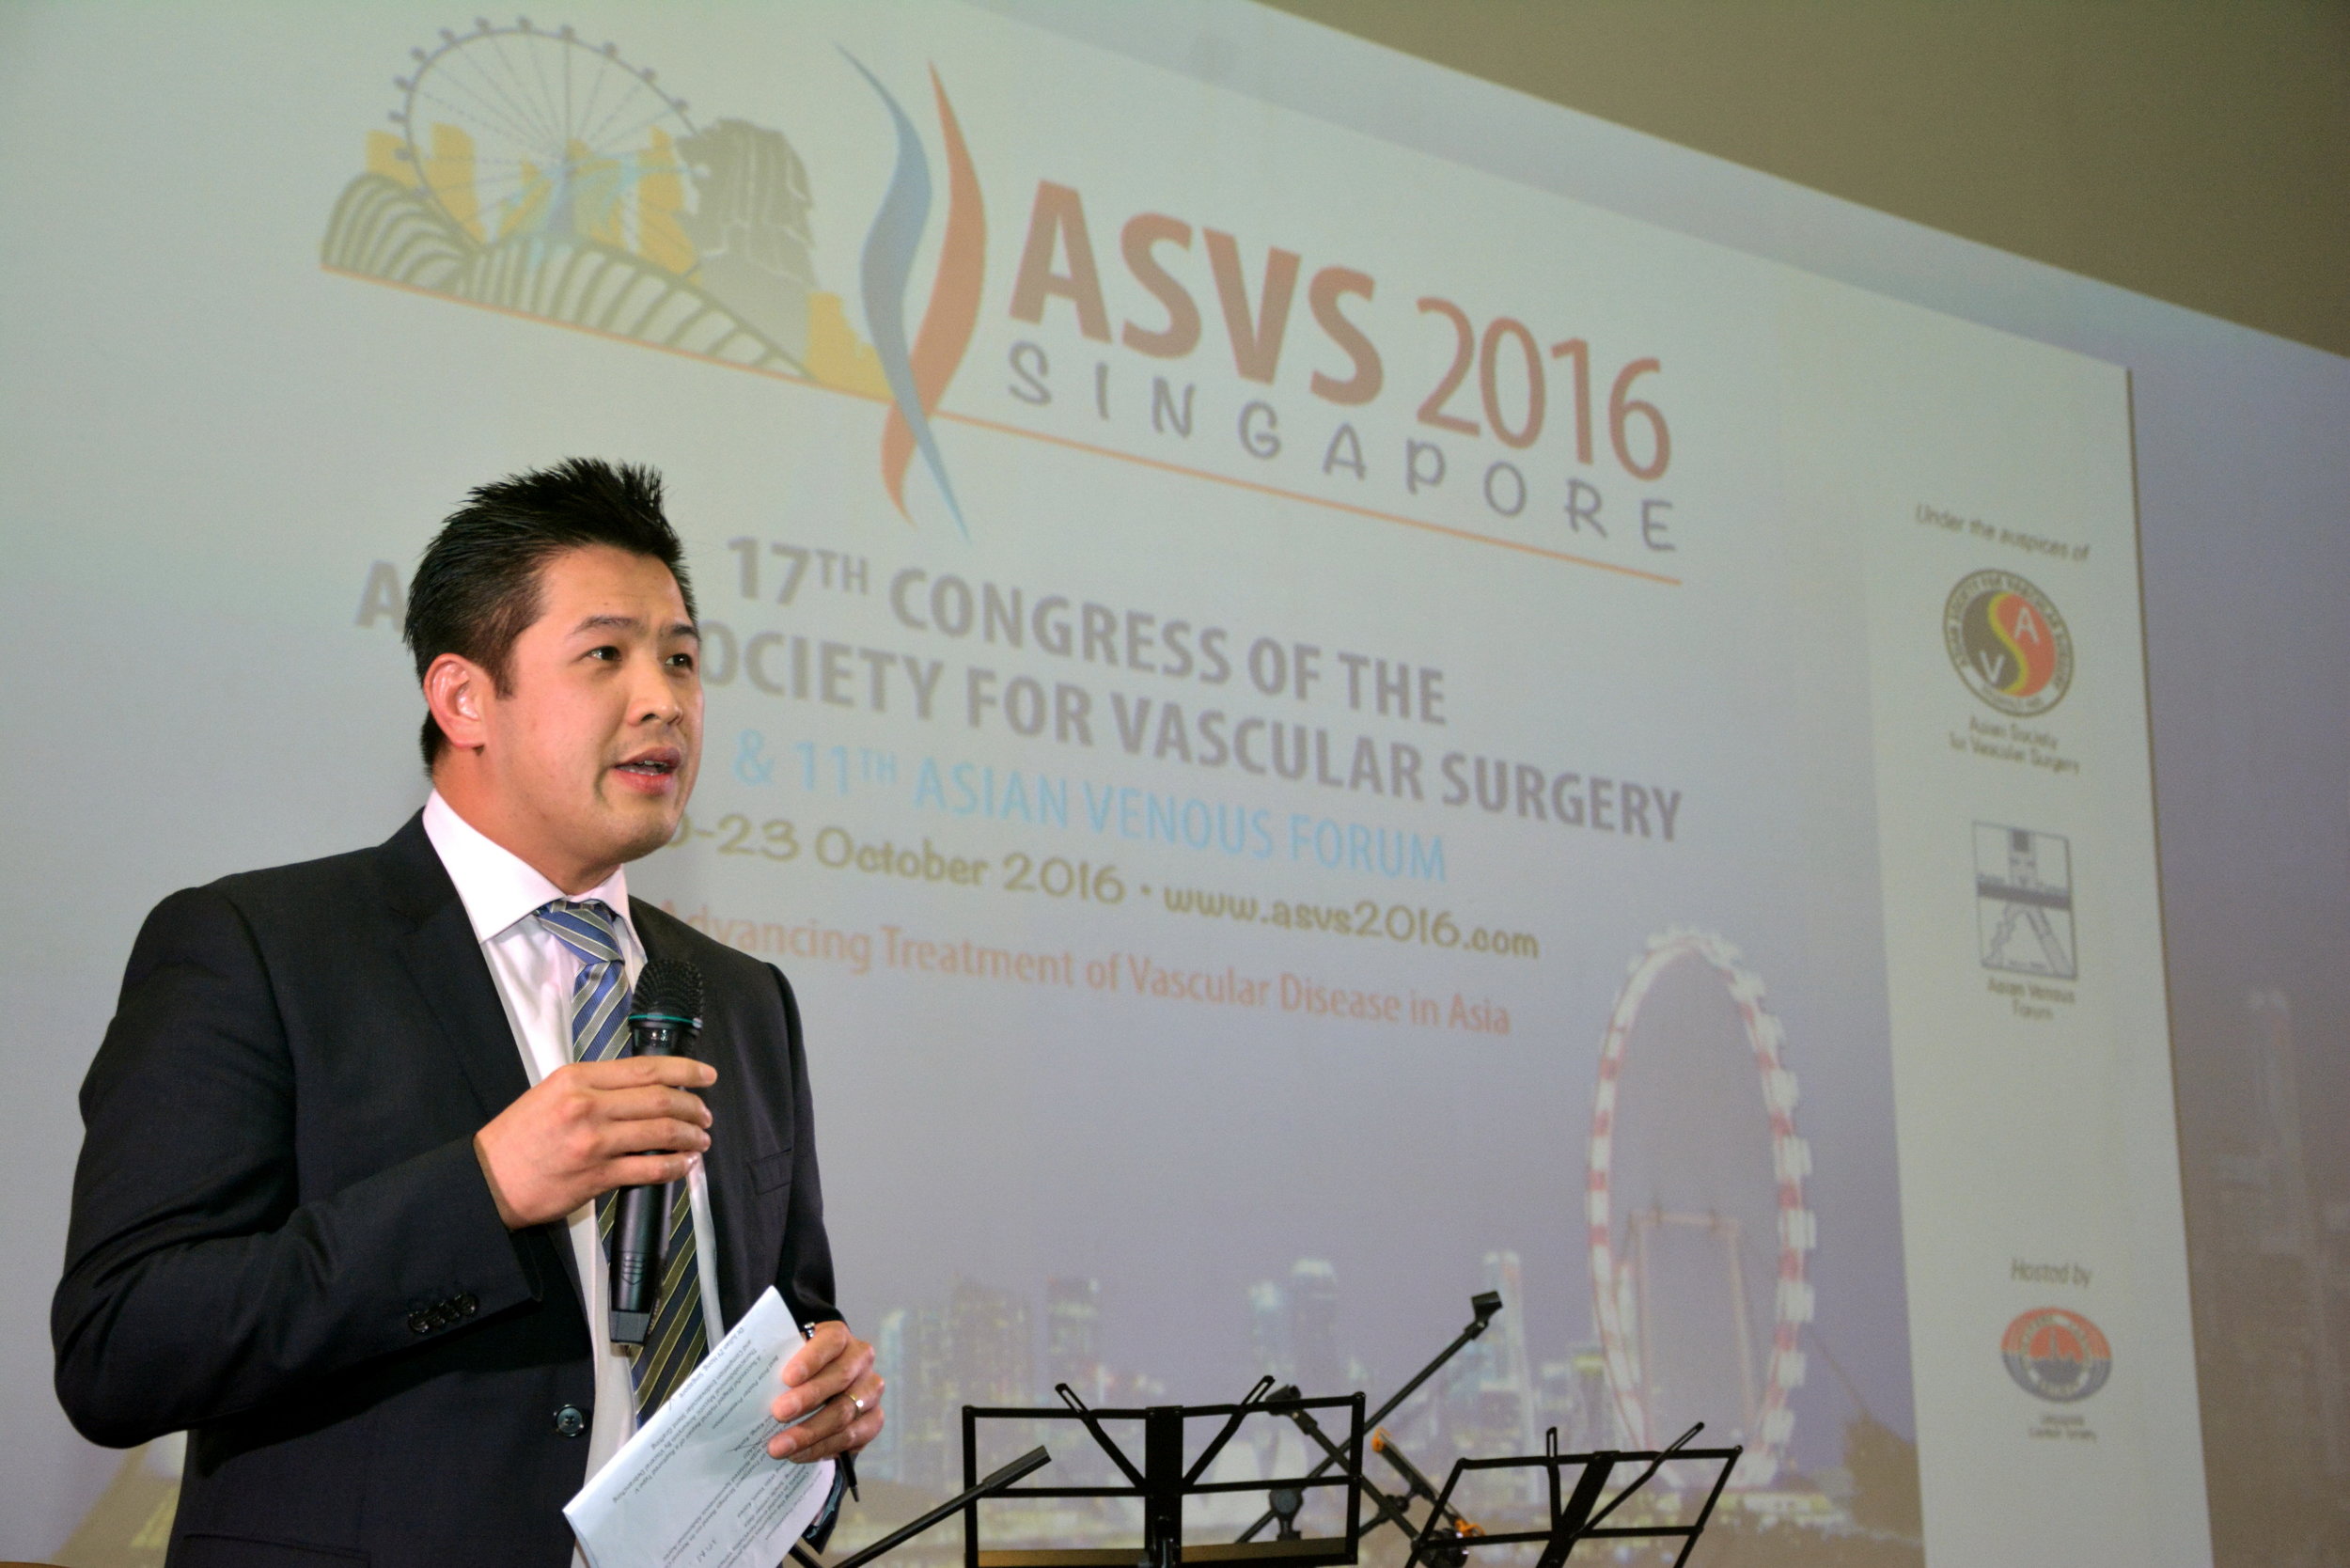   Andrew Choong   Vascular, Endovascular and Aortic Surgeon    Learn more   